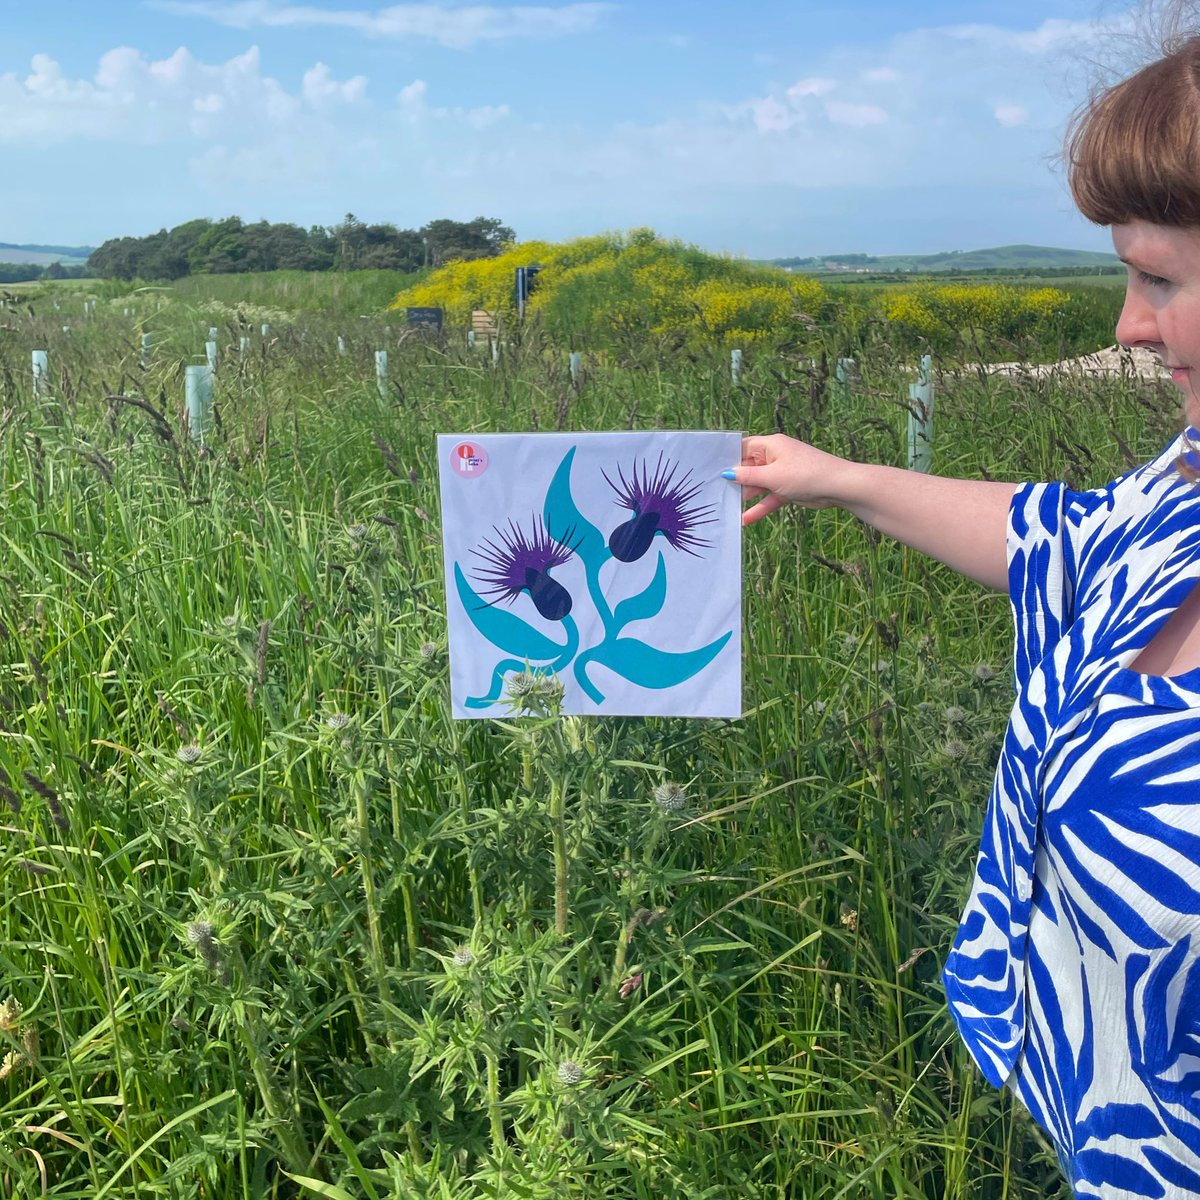 Flower Friday 🌿🌸

A little behind the scenes fun snapping pictures of the ‘Thistle Do Nicely’ print

#scottishthistle #thistles #flowerofscotland #scottishprint #scottishcraft